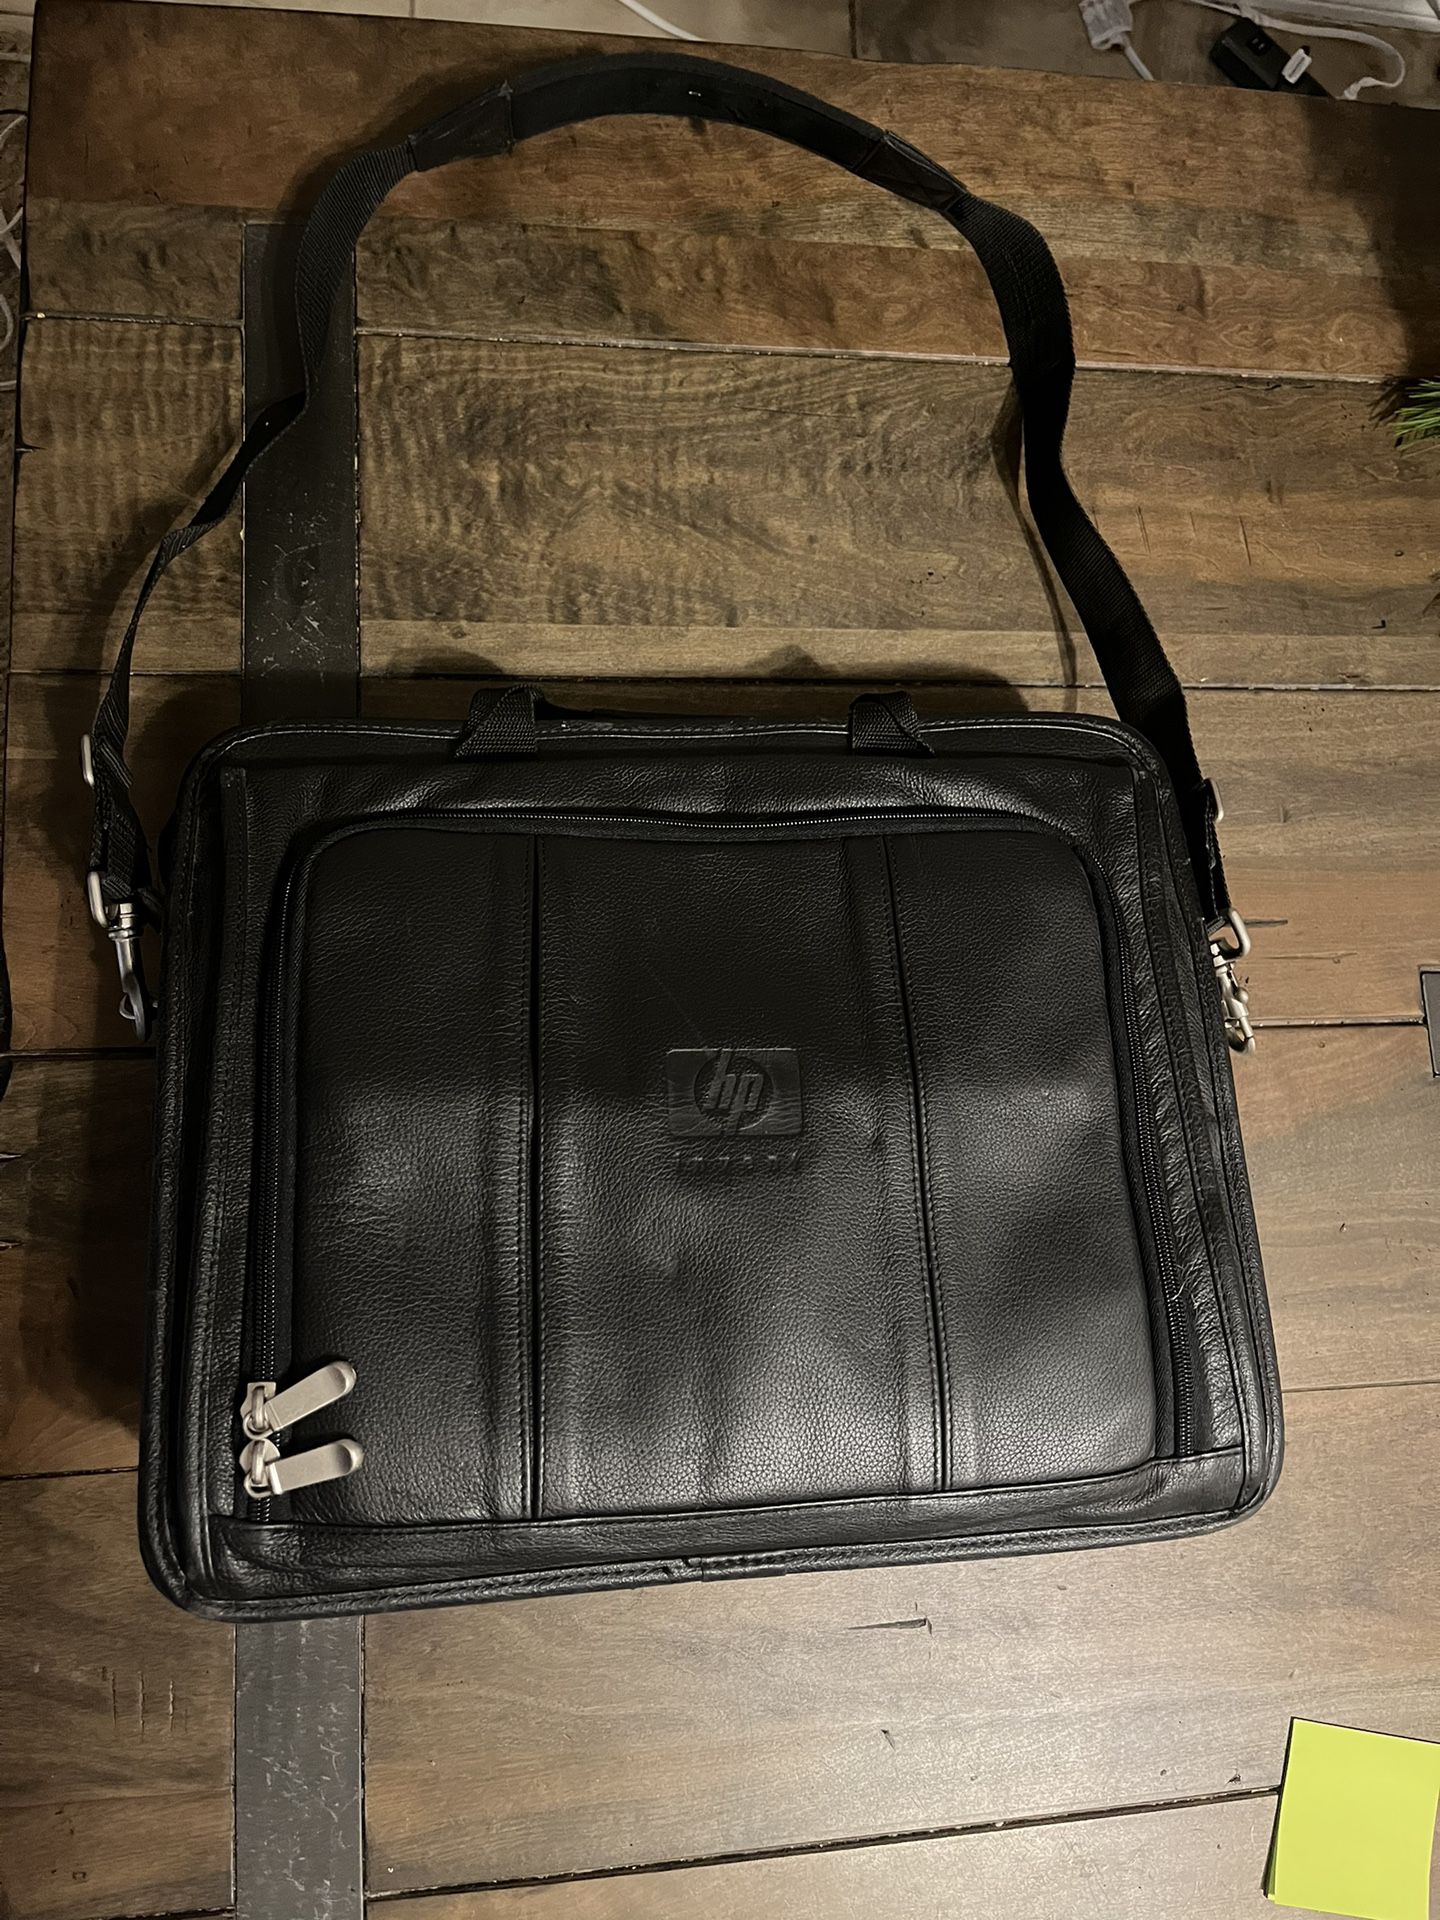 HP Leather Laptop Bag